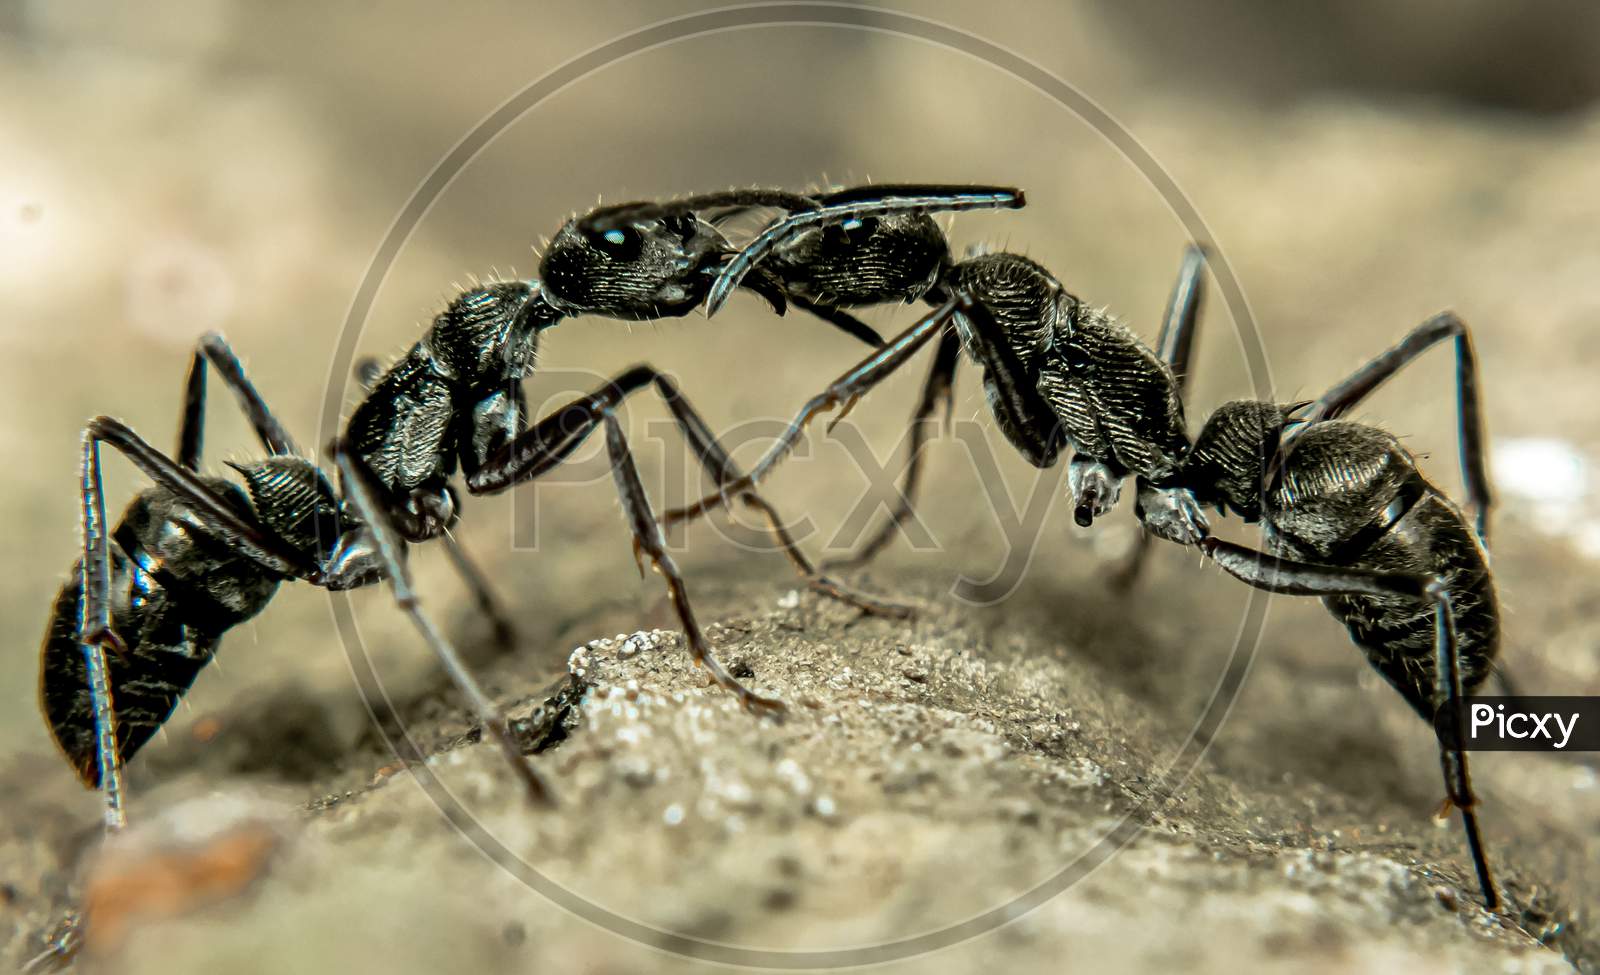 Two ants fight